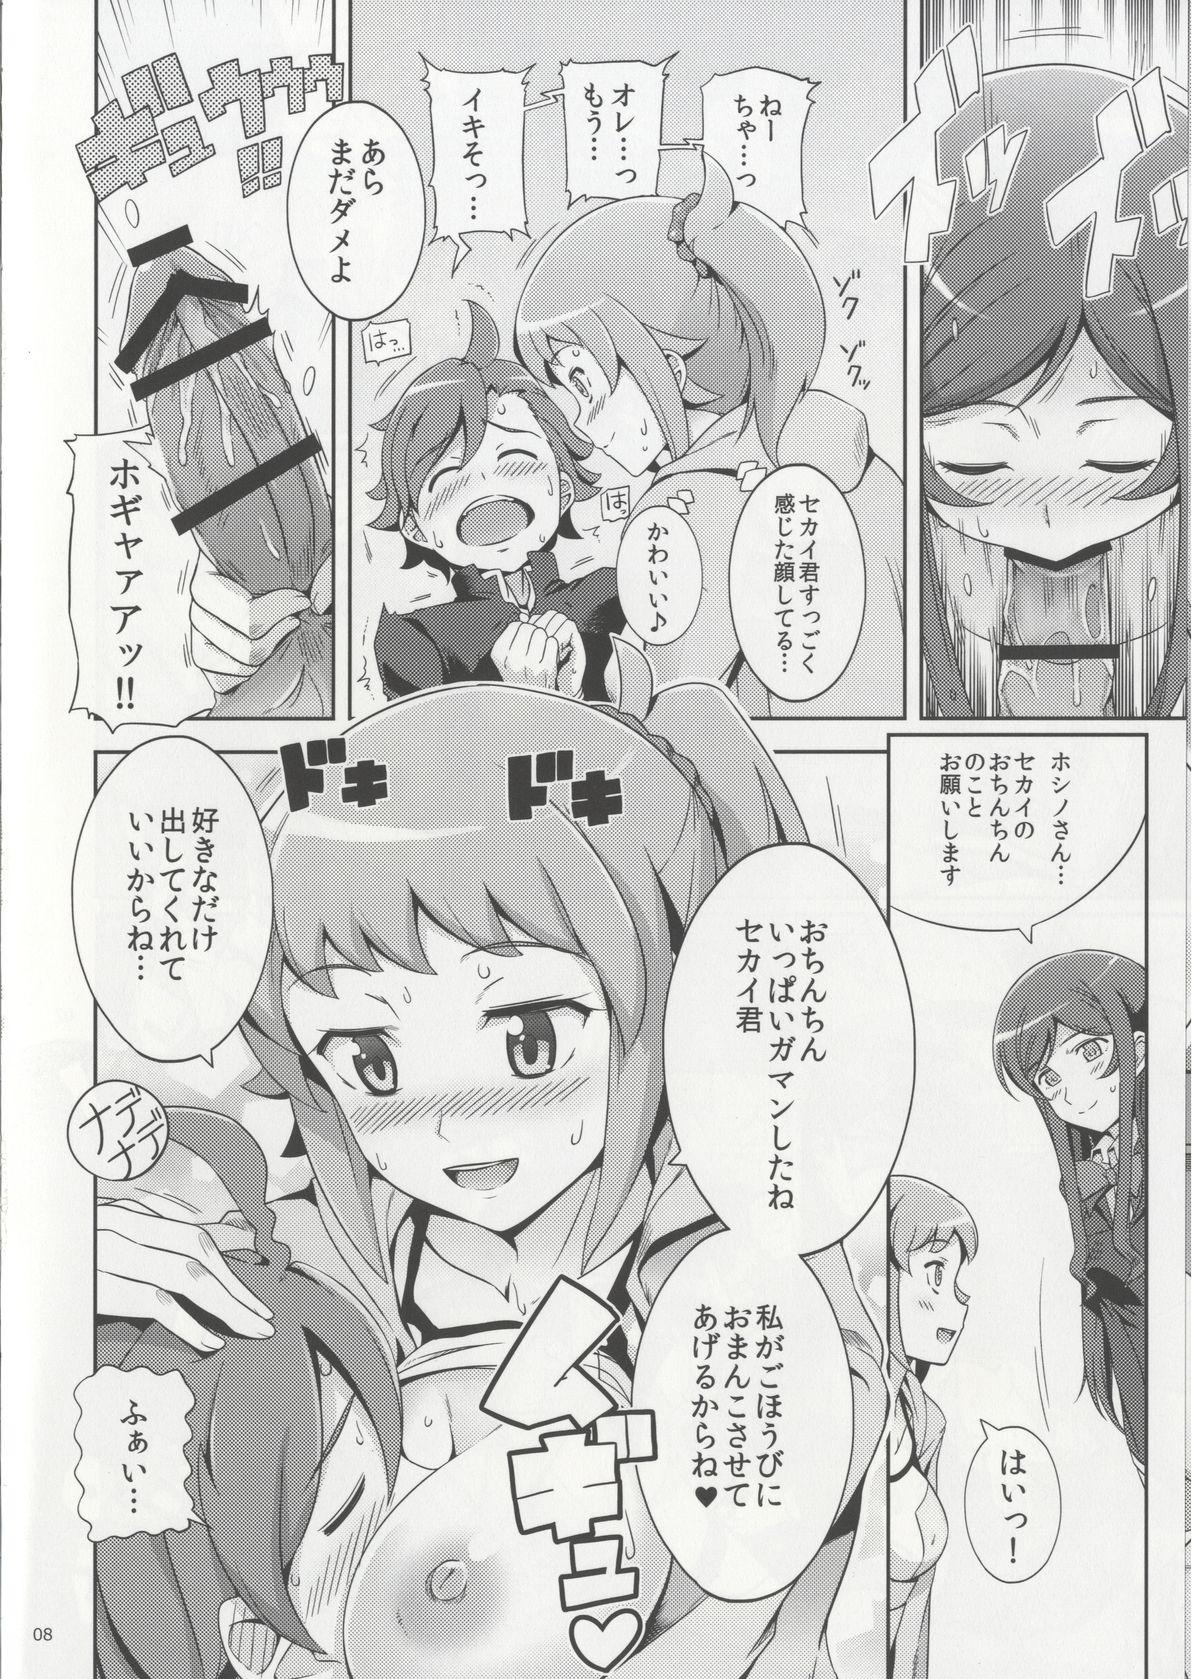 Huge Boobs Namahame Try! - Gundam build fighters try Femdom - Page 8